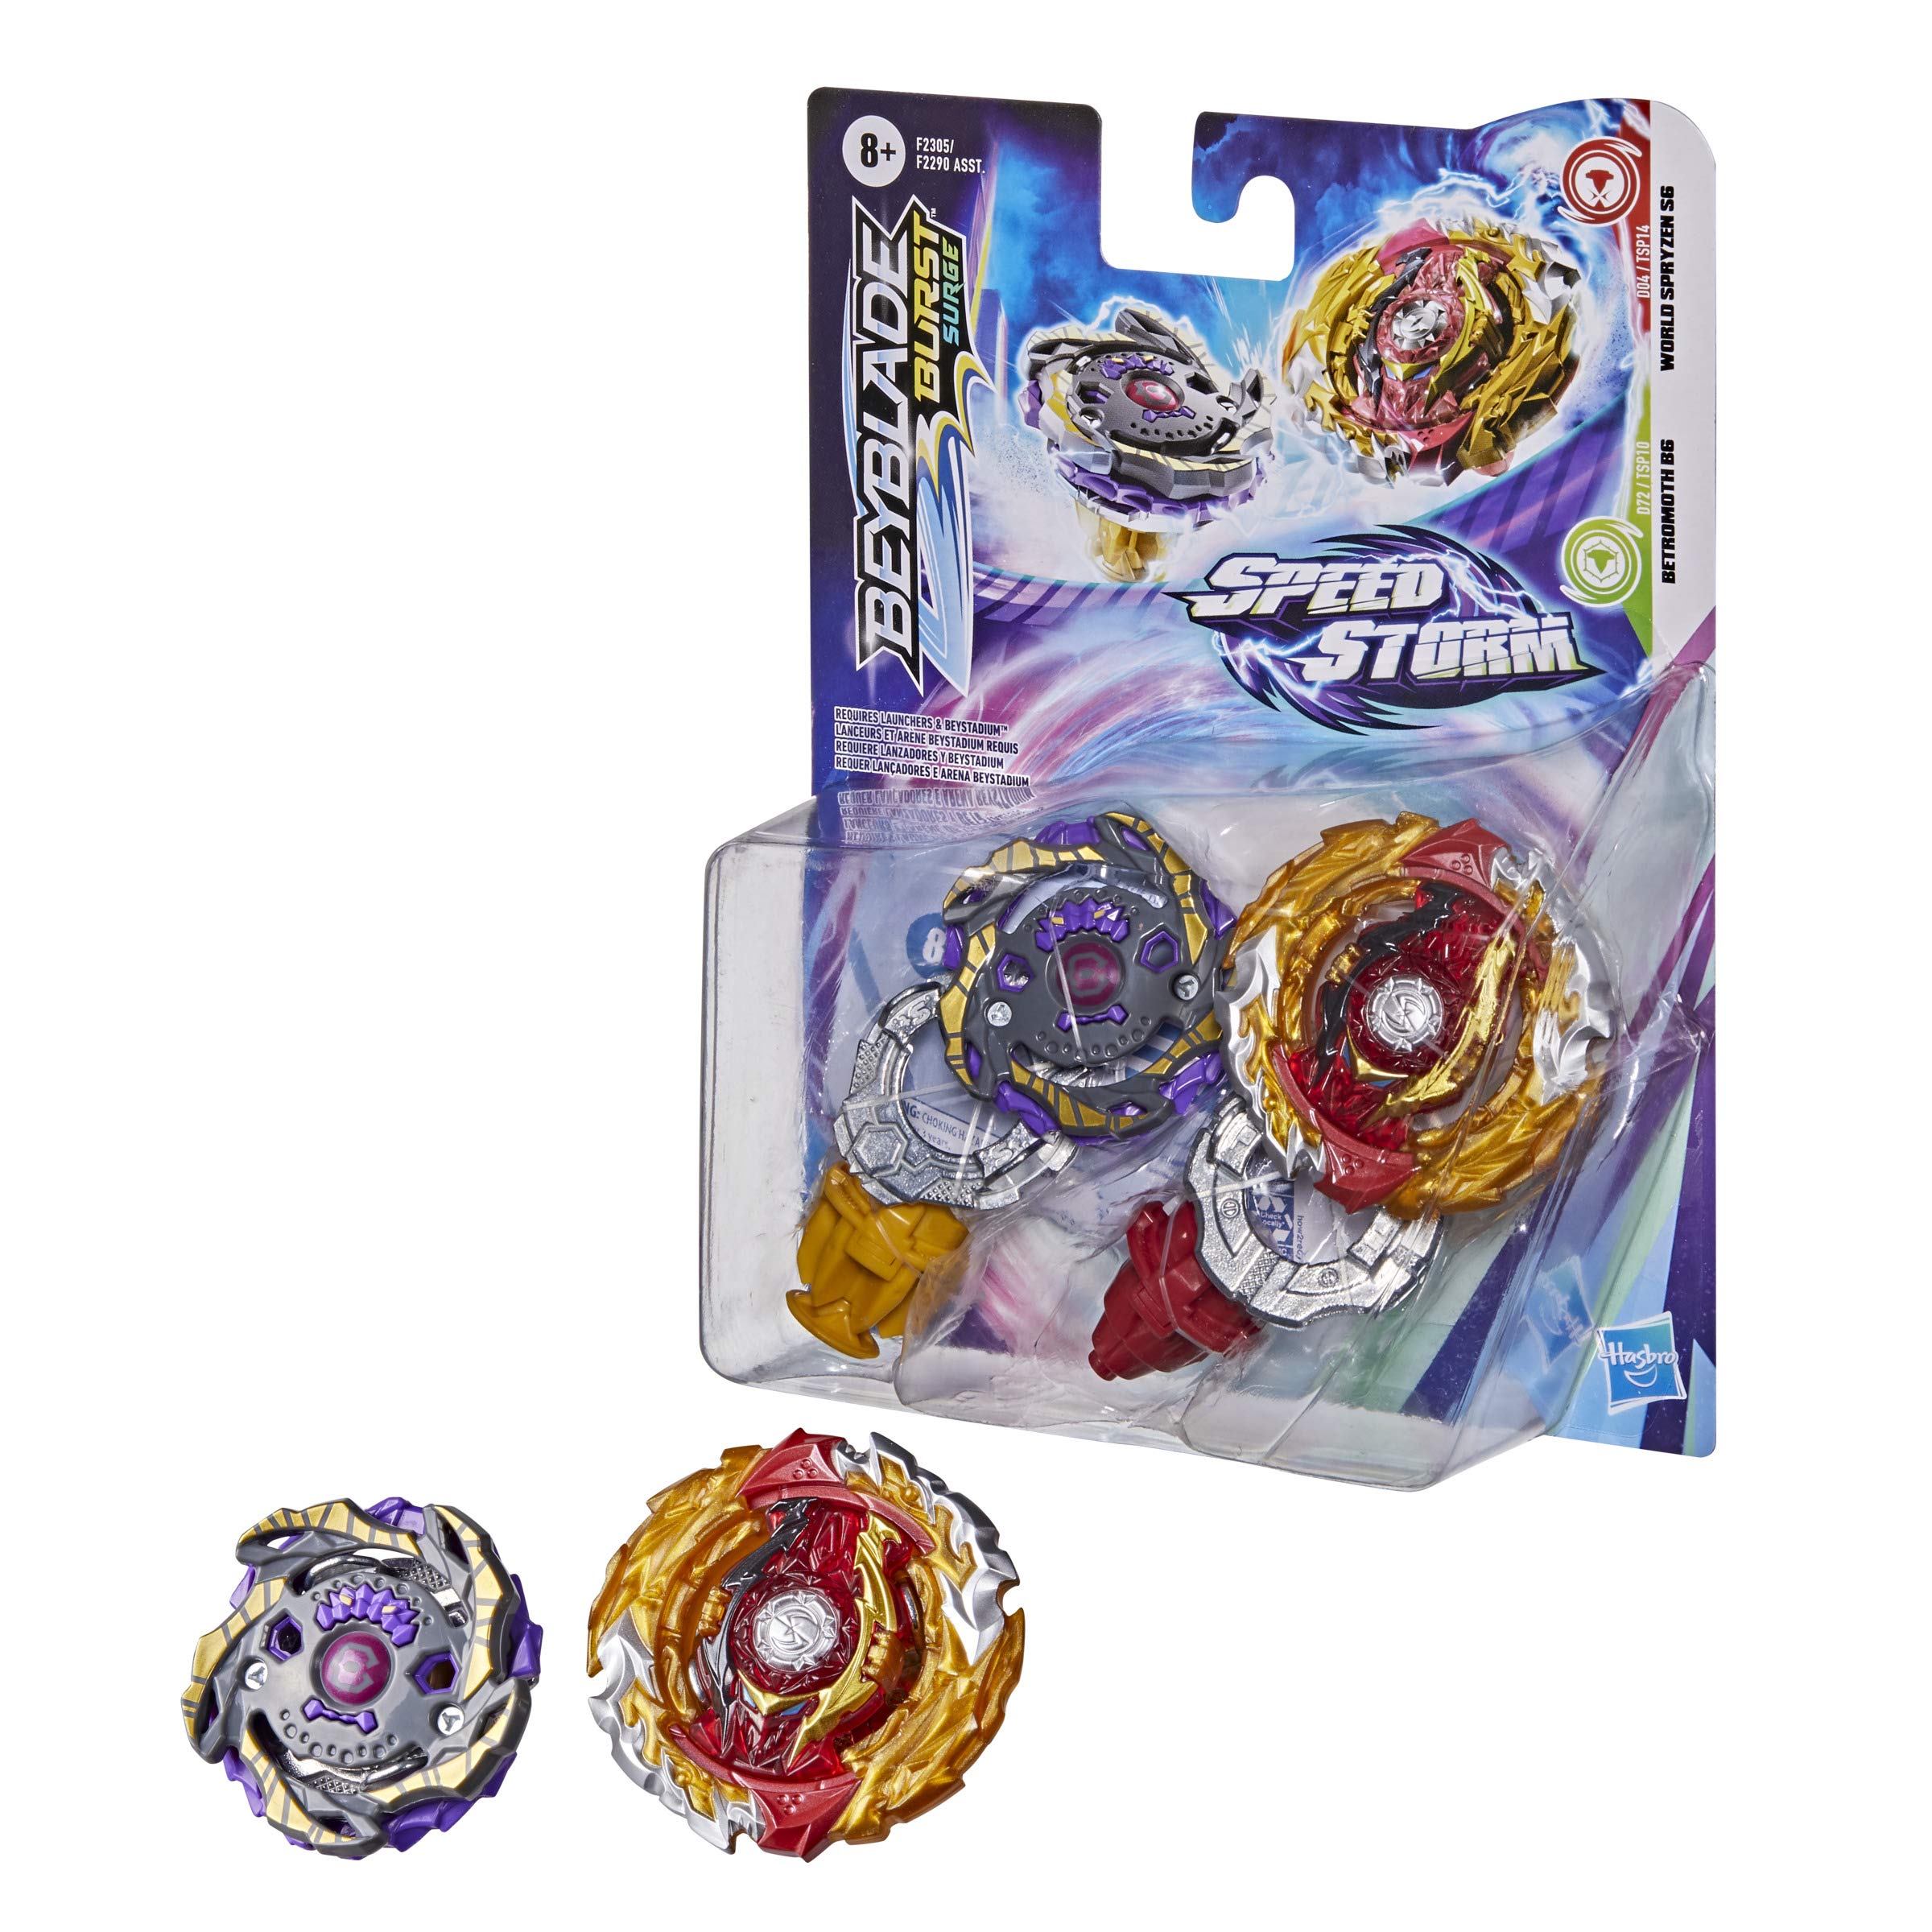 BEYBLADE Burst Surge Speedstorm World Spryzen S6 and Betromoth B6 Spinning Top Dual Pack - 2 Battling Game Top Toy for Kids Ages 8 and Up